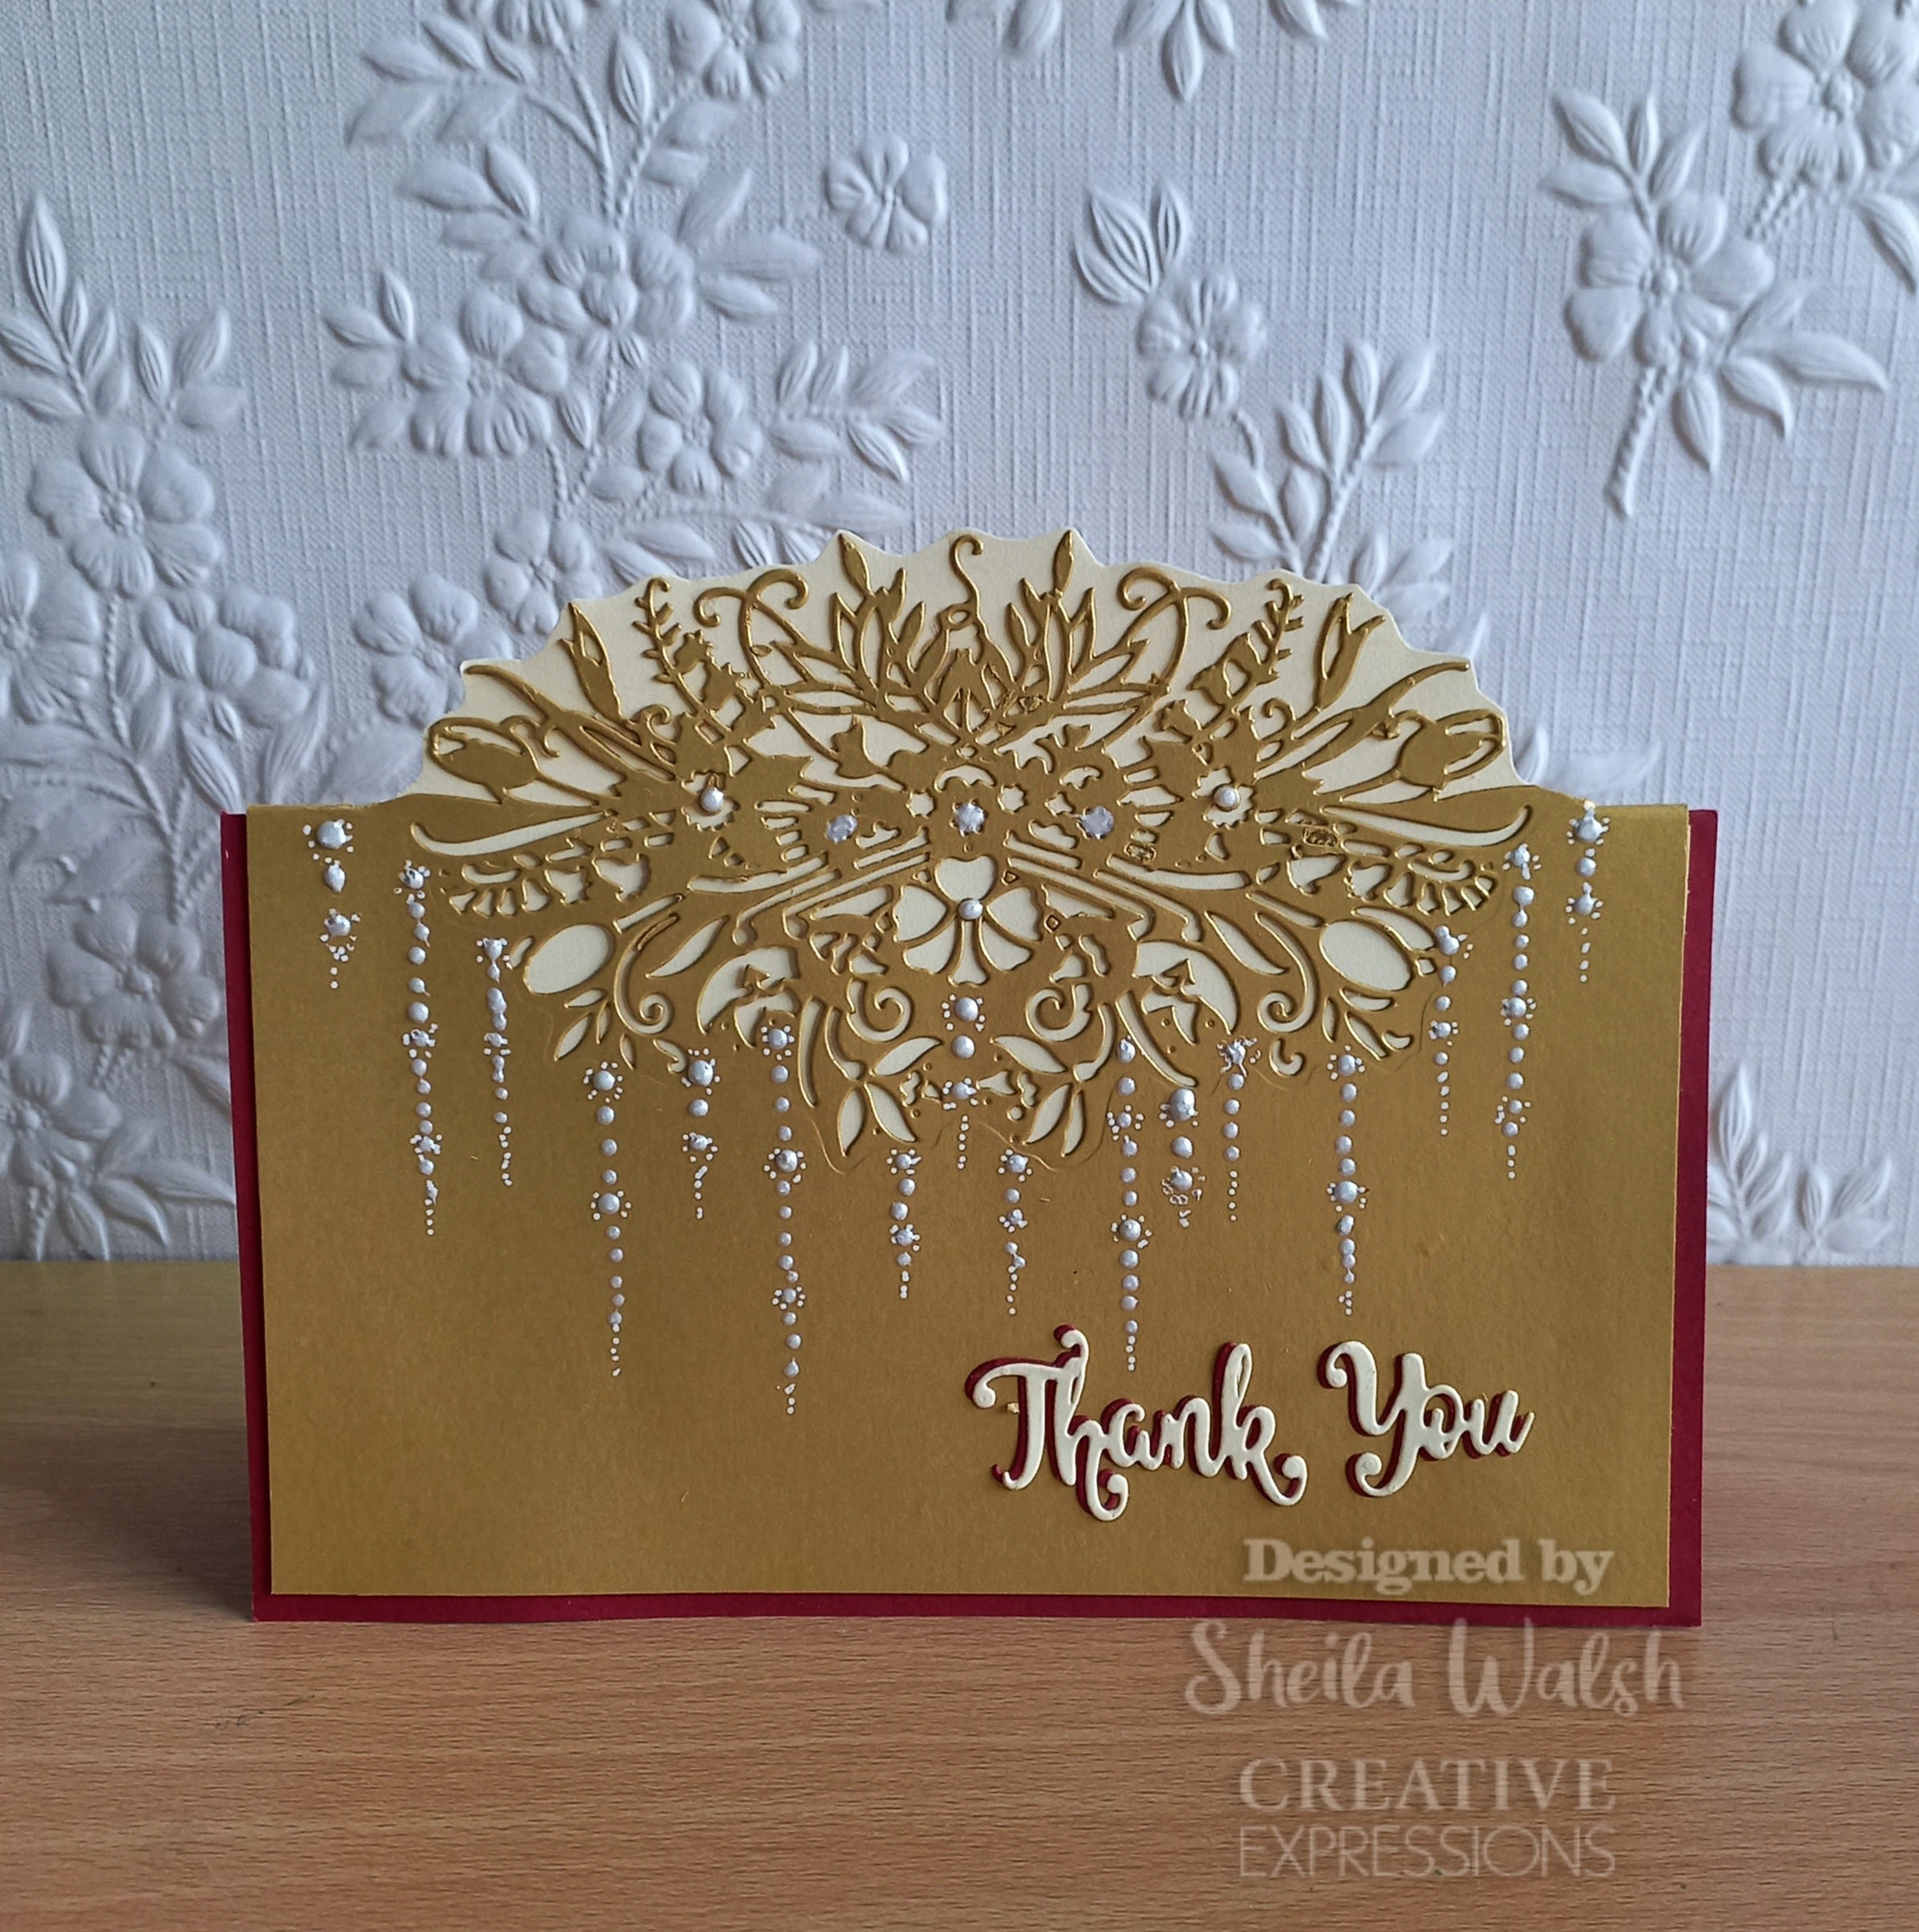 Creative Expressions Paper Cuts Floral Spray Edger Craft Die